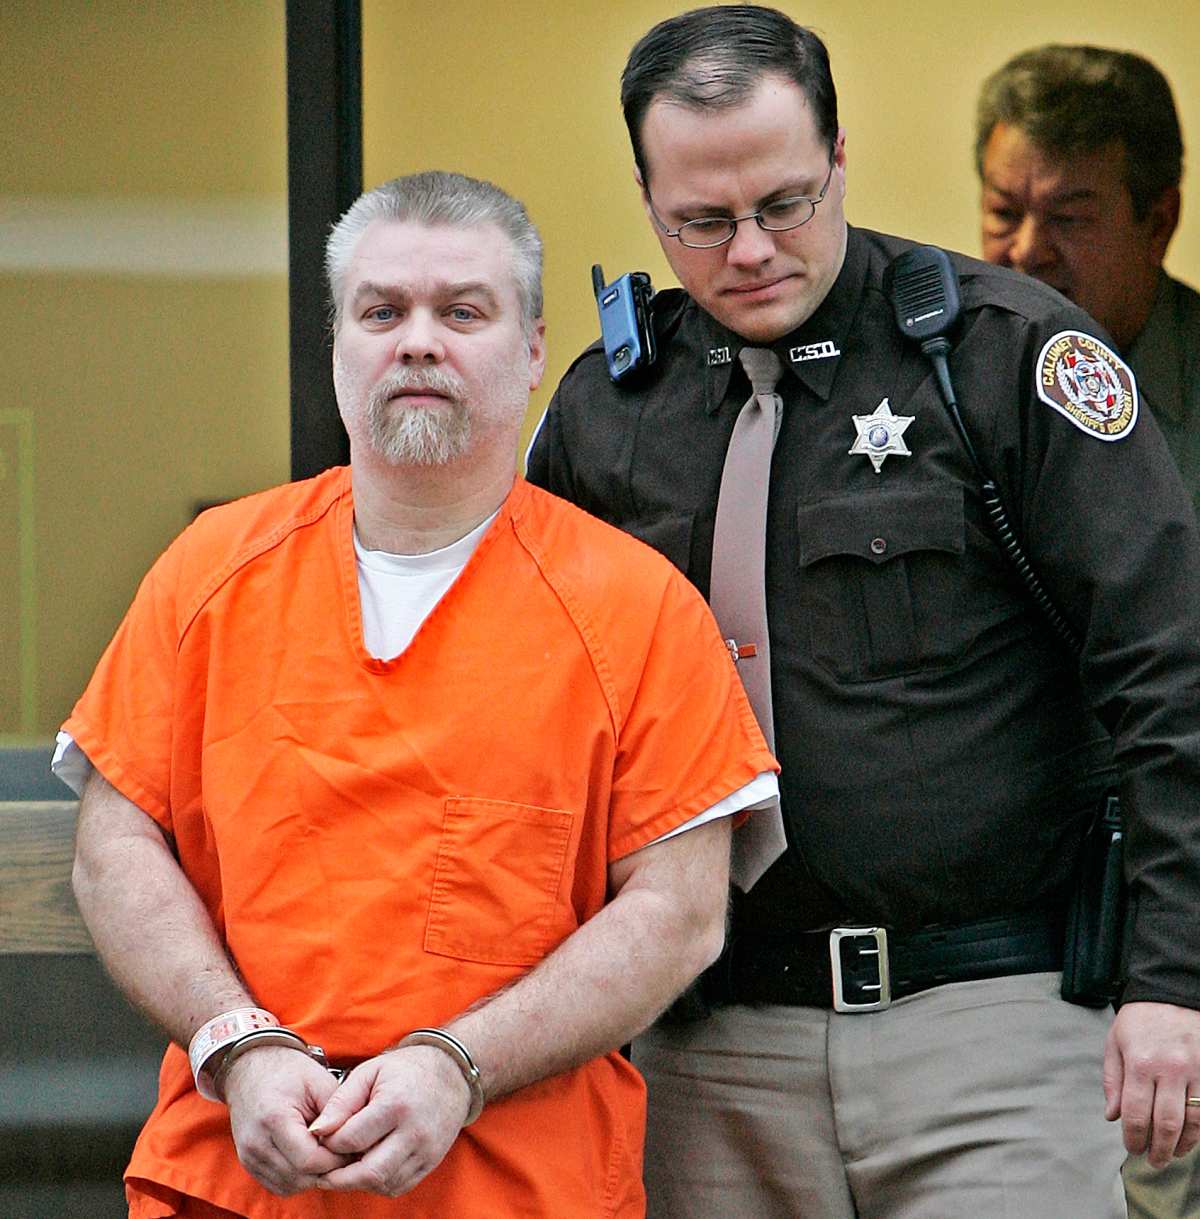 Steven Avery's ex-fiancee makes new claims, telling TMZ Avery once